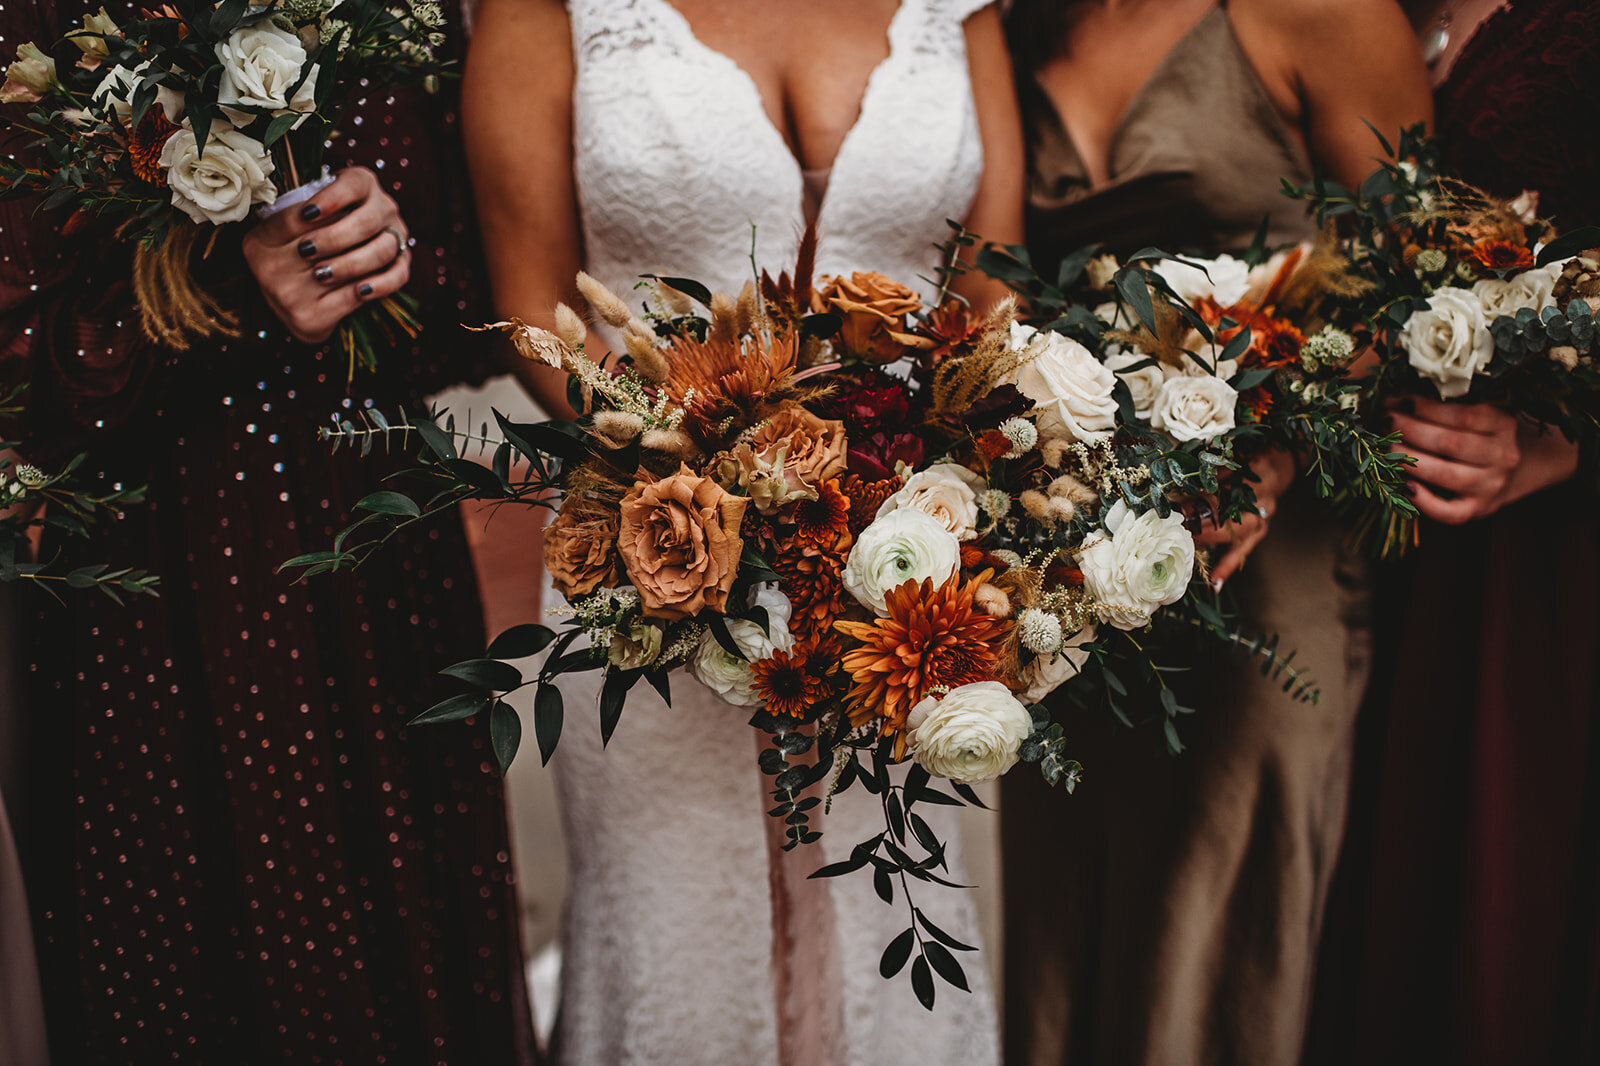 Baltimore photographers photographs bride holding a warm toned wedding bouquet while standing with her bridesmaids who are also holding bouquets while wearing their bridesmaids dresses